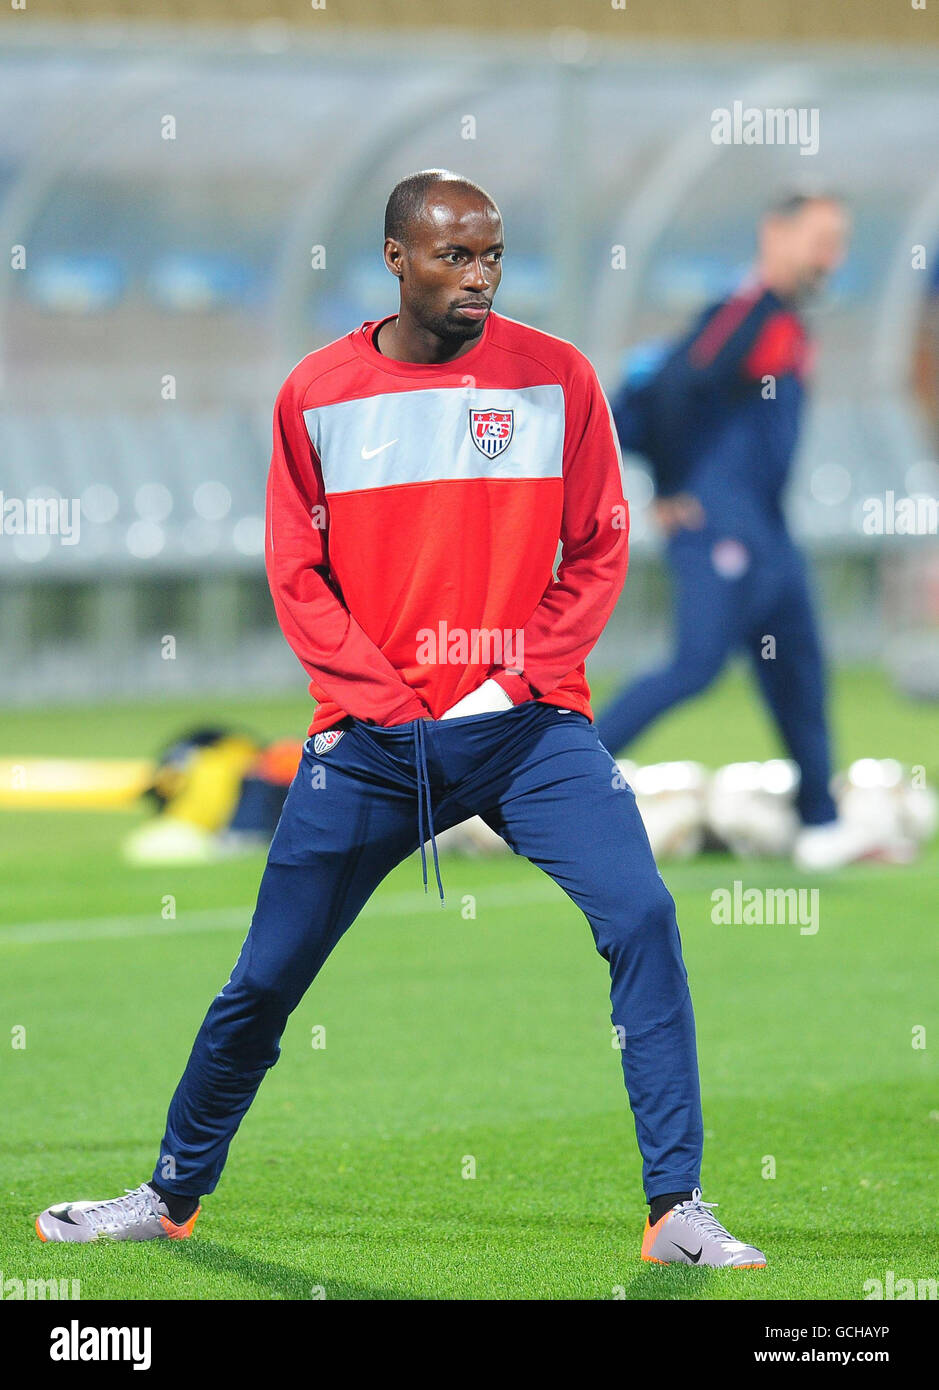 Soccer - 2010 FIFA World Cup South Africa - Group C - England v USA - USA Training - Day Four - Royal Bafokeng Stadium. USA's DaMarcus Beasley during a training session at the Royal Bafokeng Stadium, Rustenburg, South Africa. Stock Photo